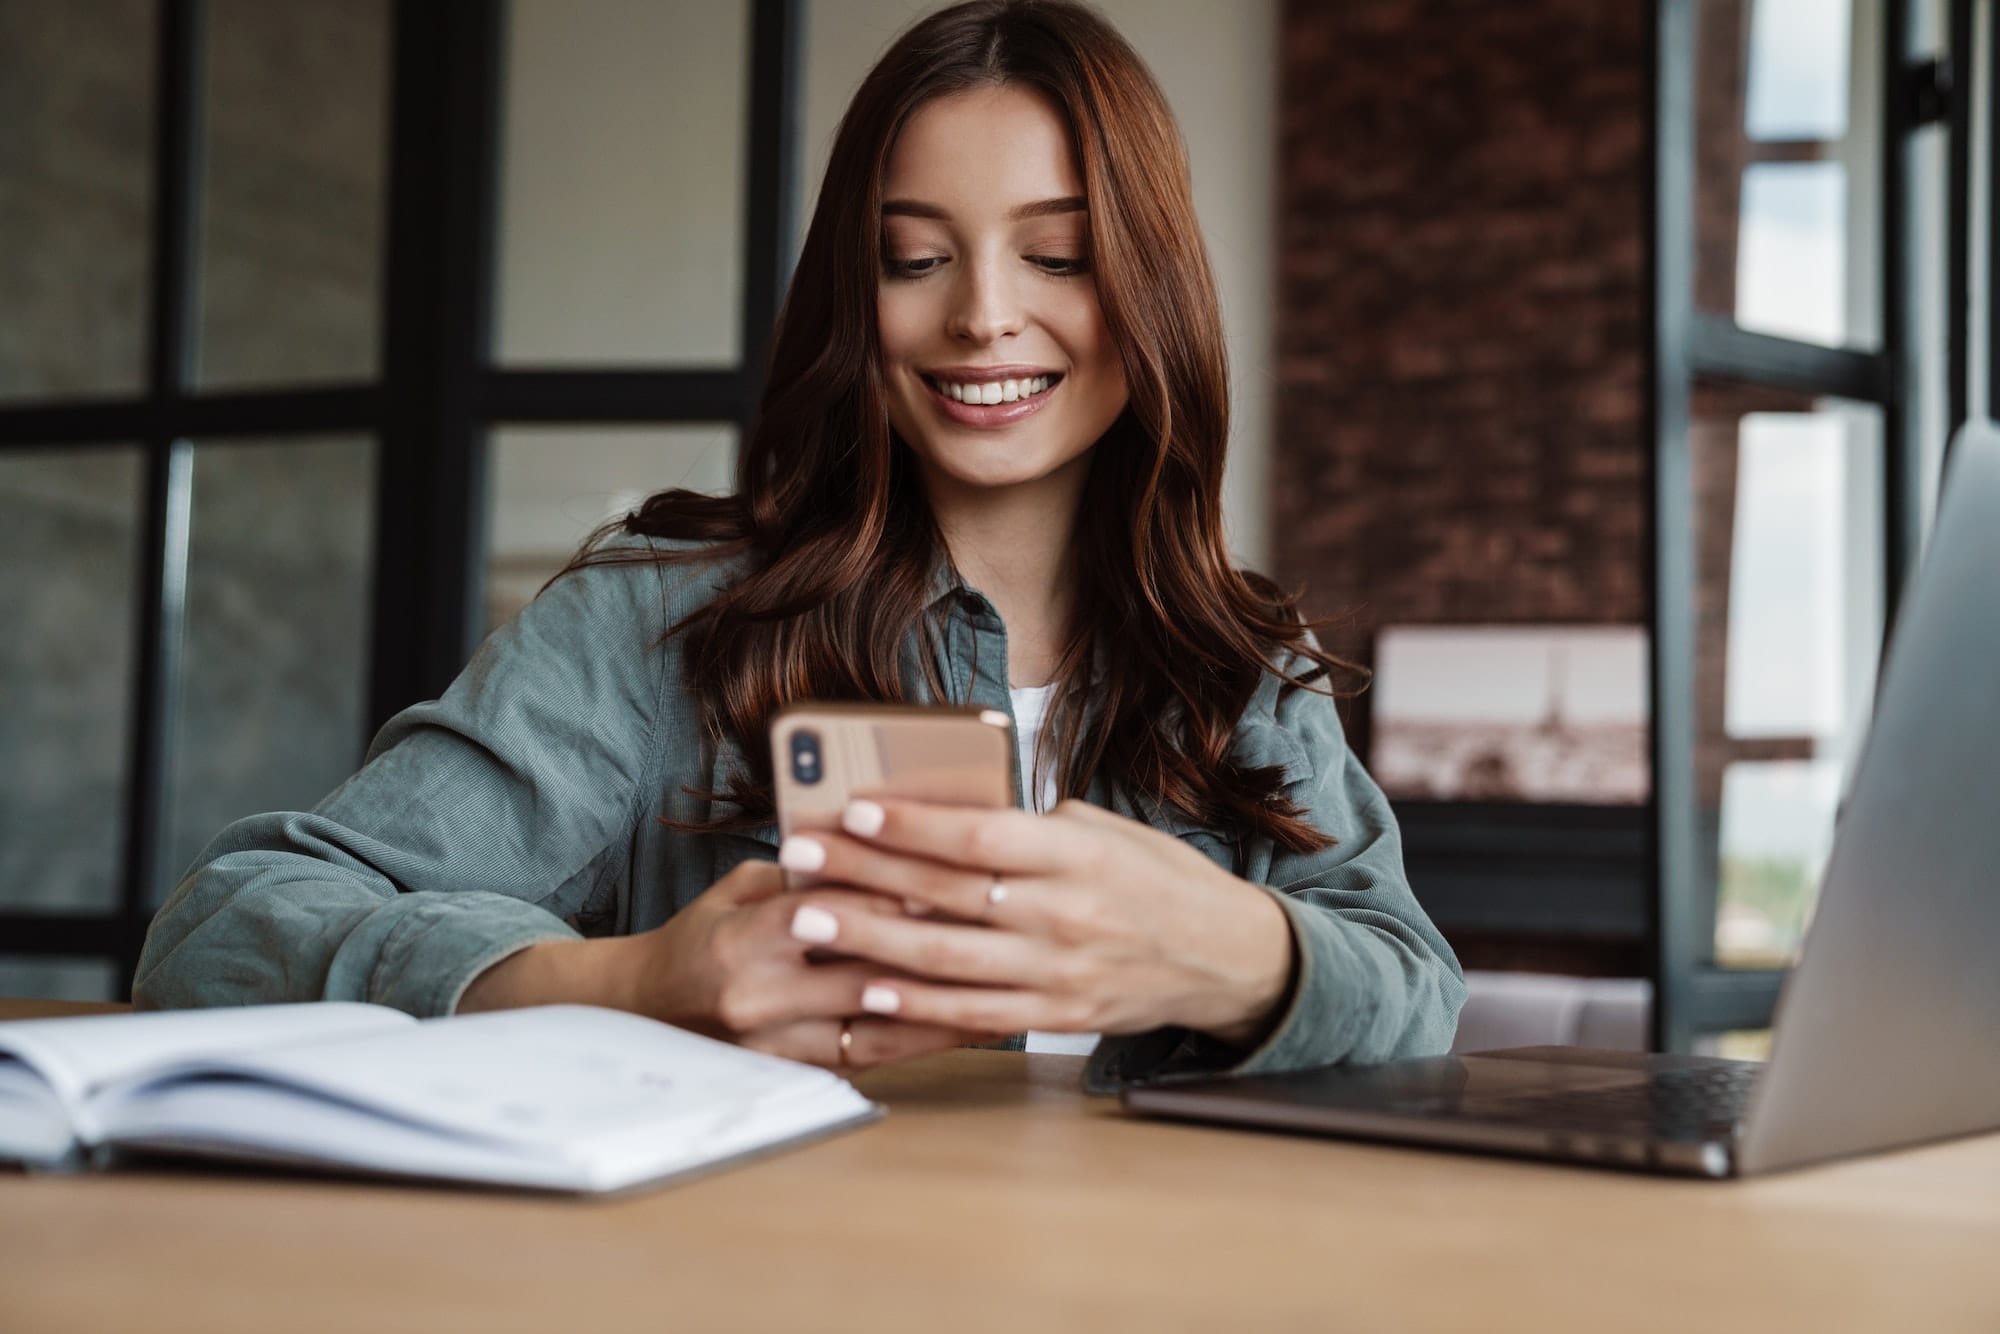 Beautiful smiling woman using cellphone while working with laptop